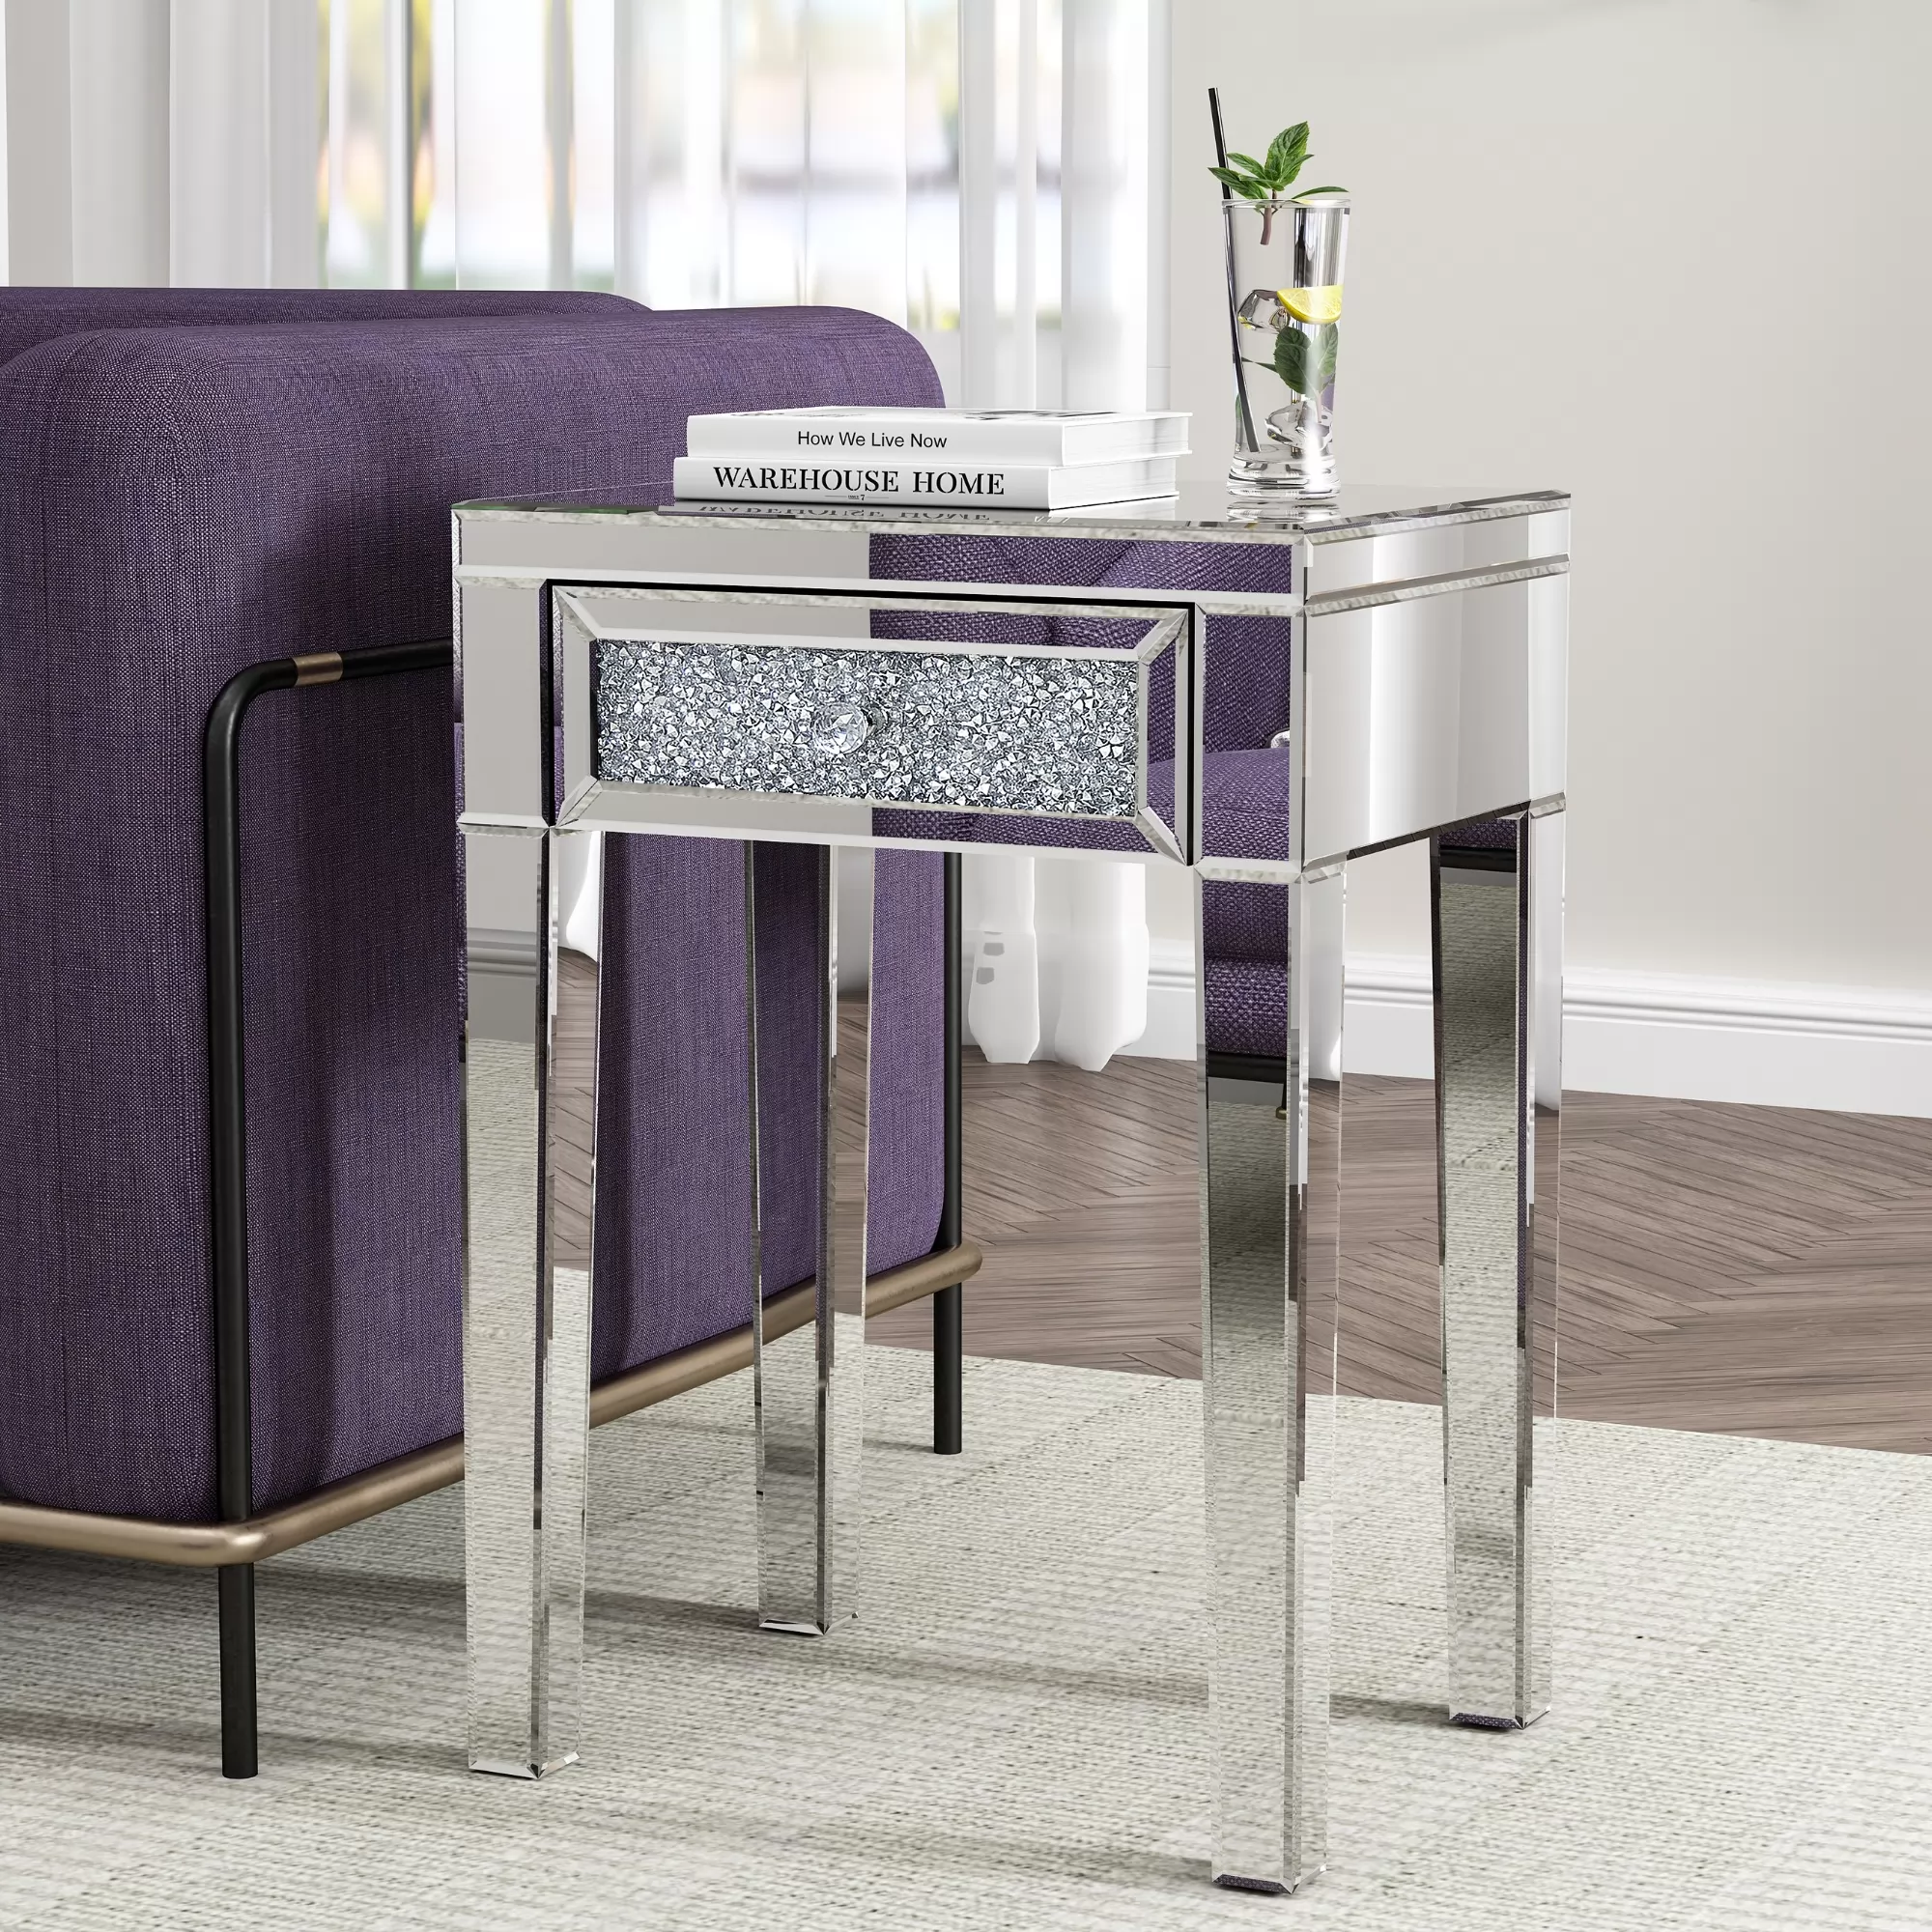 SHYFOY 23.2'' Tall 4 Legs Glass End Table with Drawer